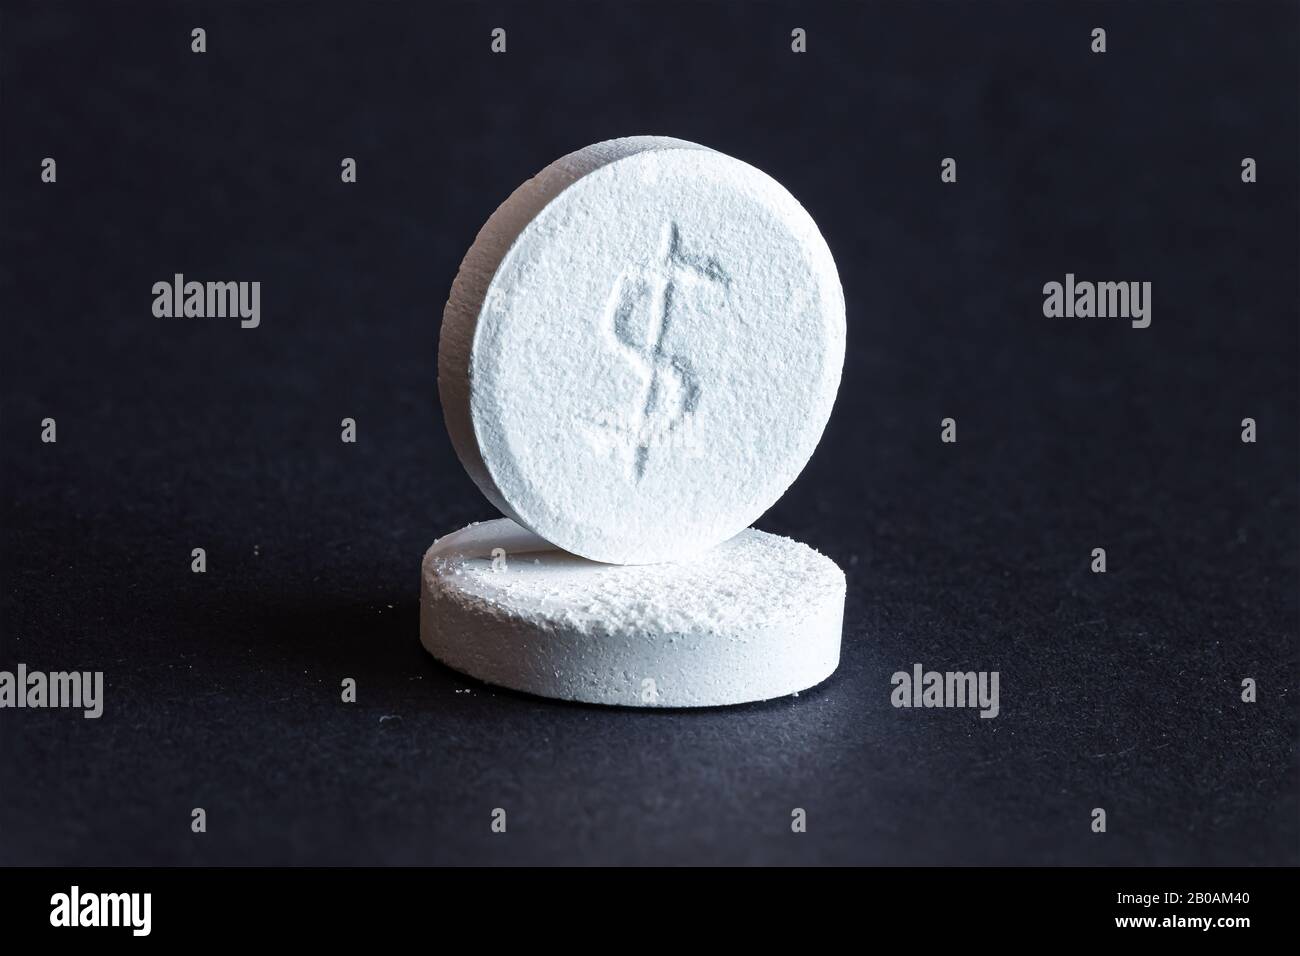 Two pills with dollar sign engraved Stock Photo